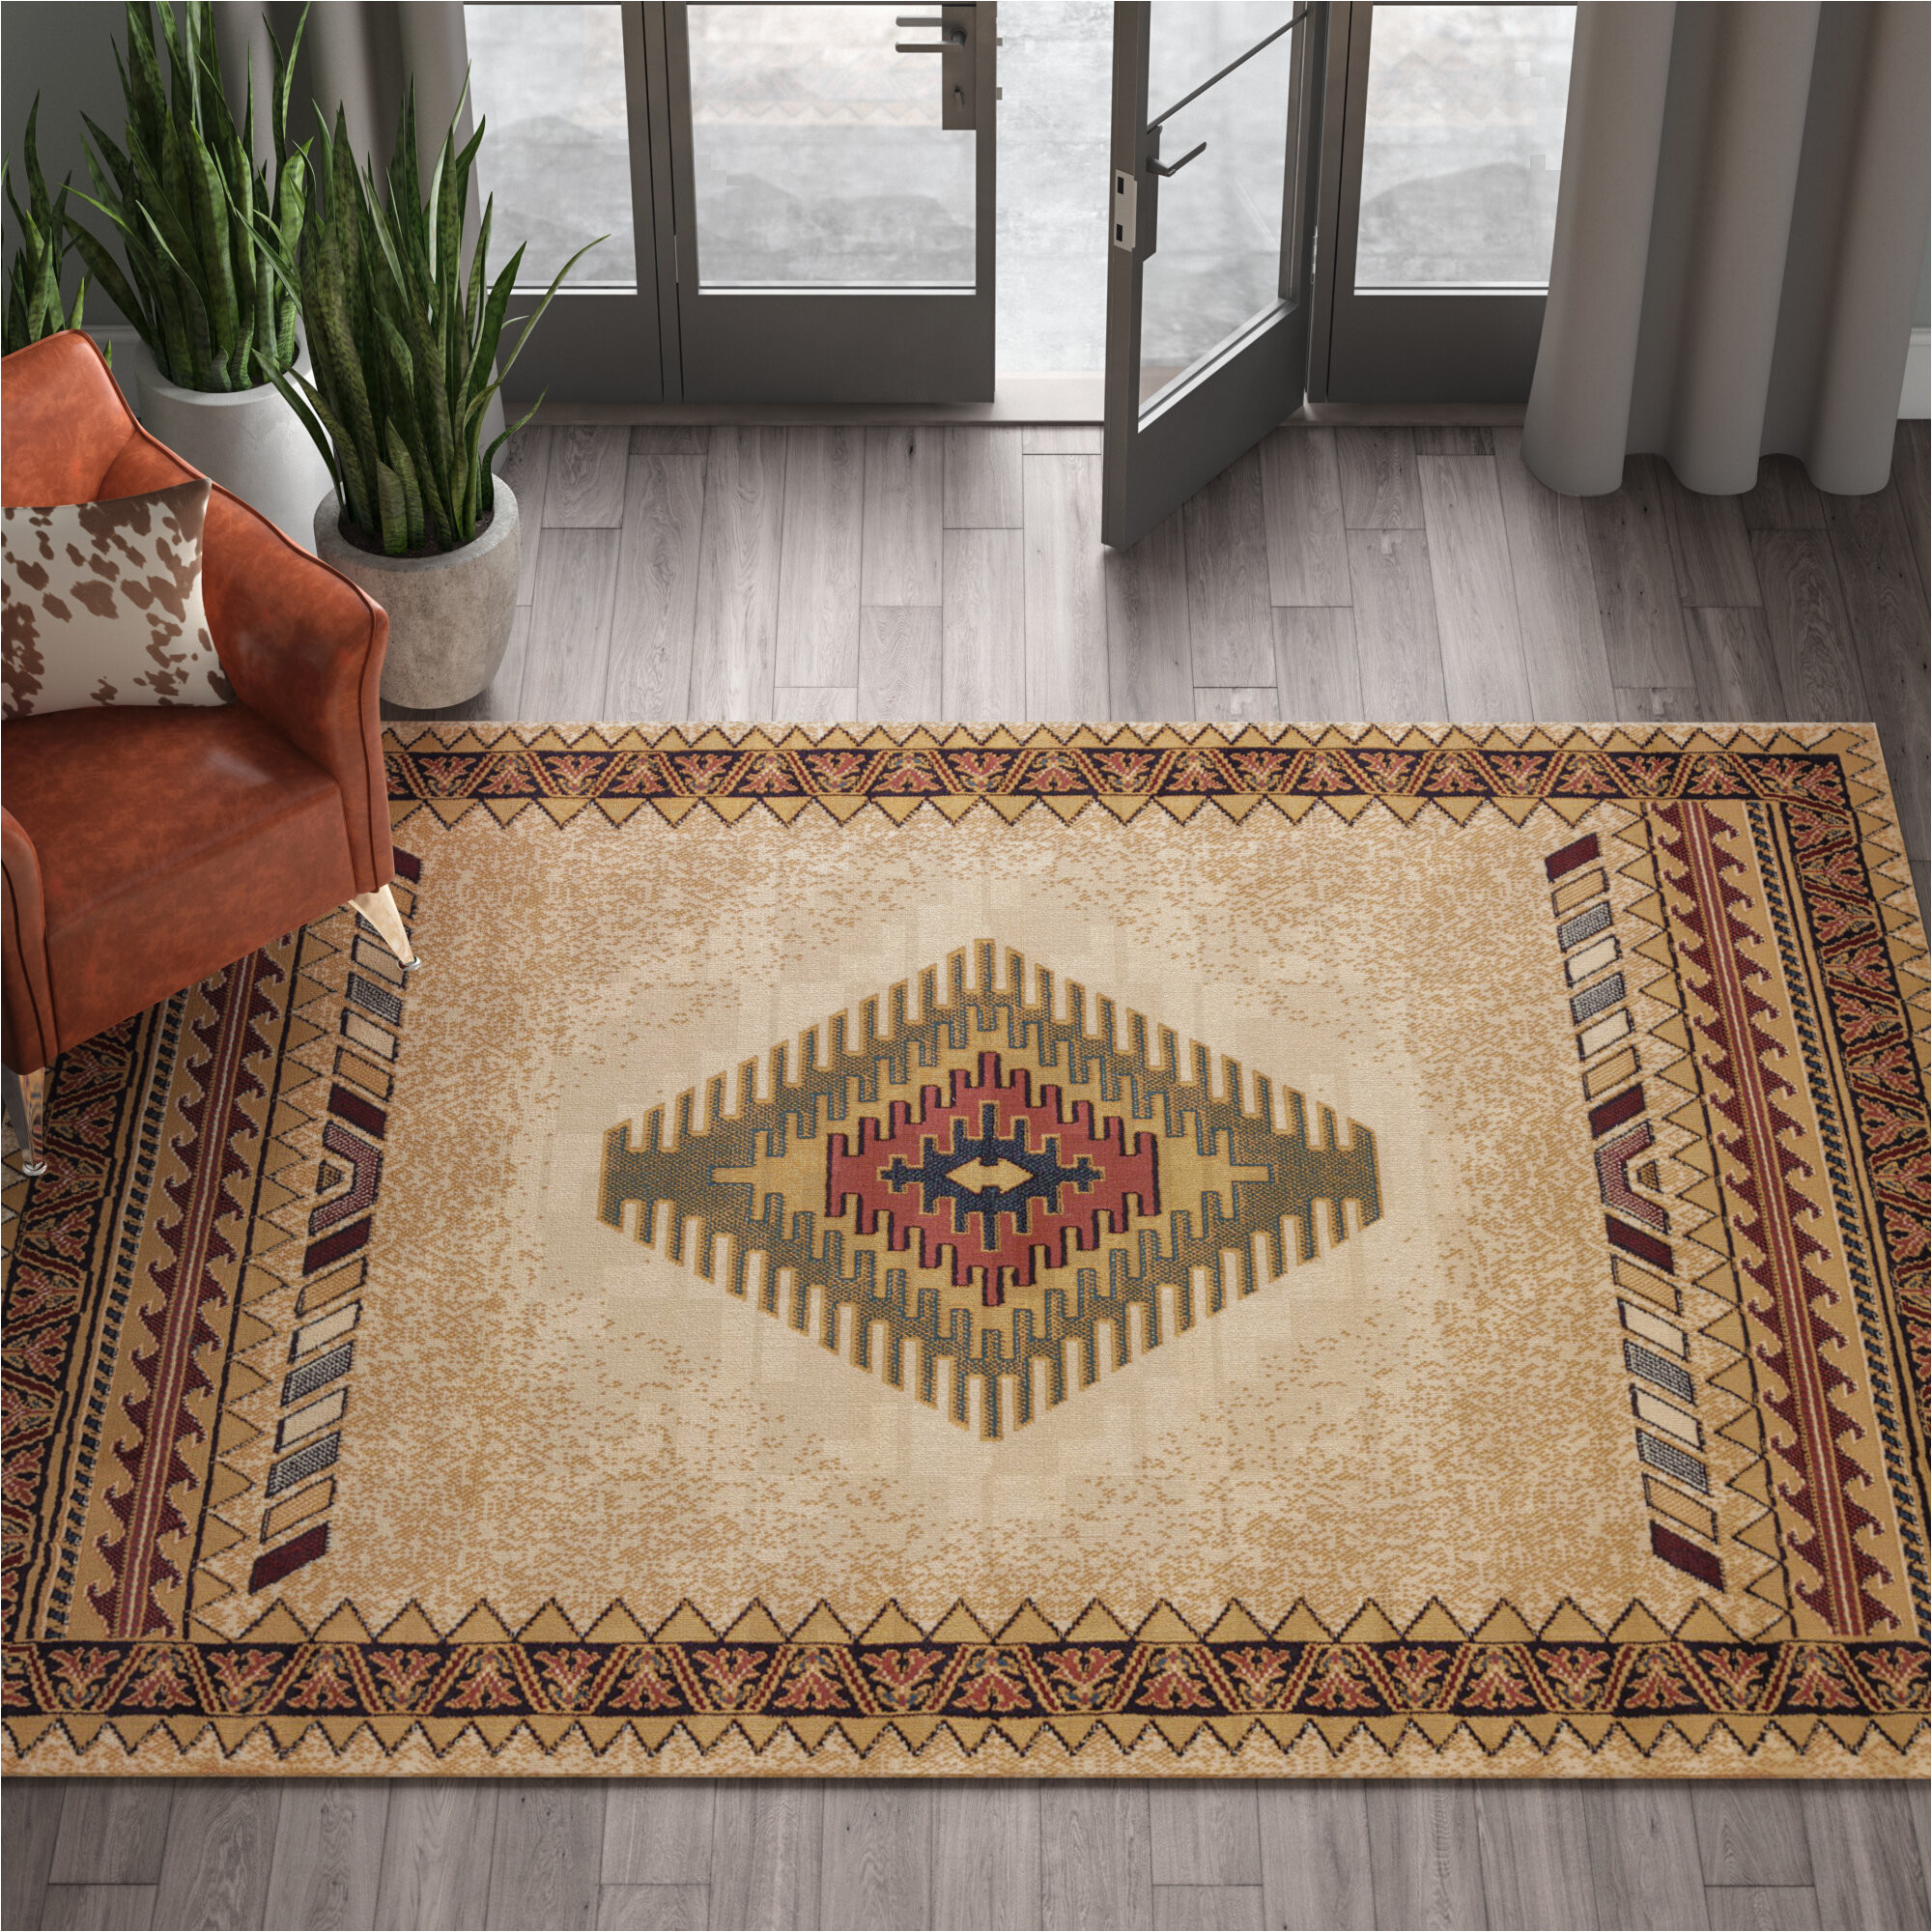 Area Rugs fort Collins Co Hyacinthe Border Cream area Rug